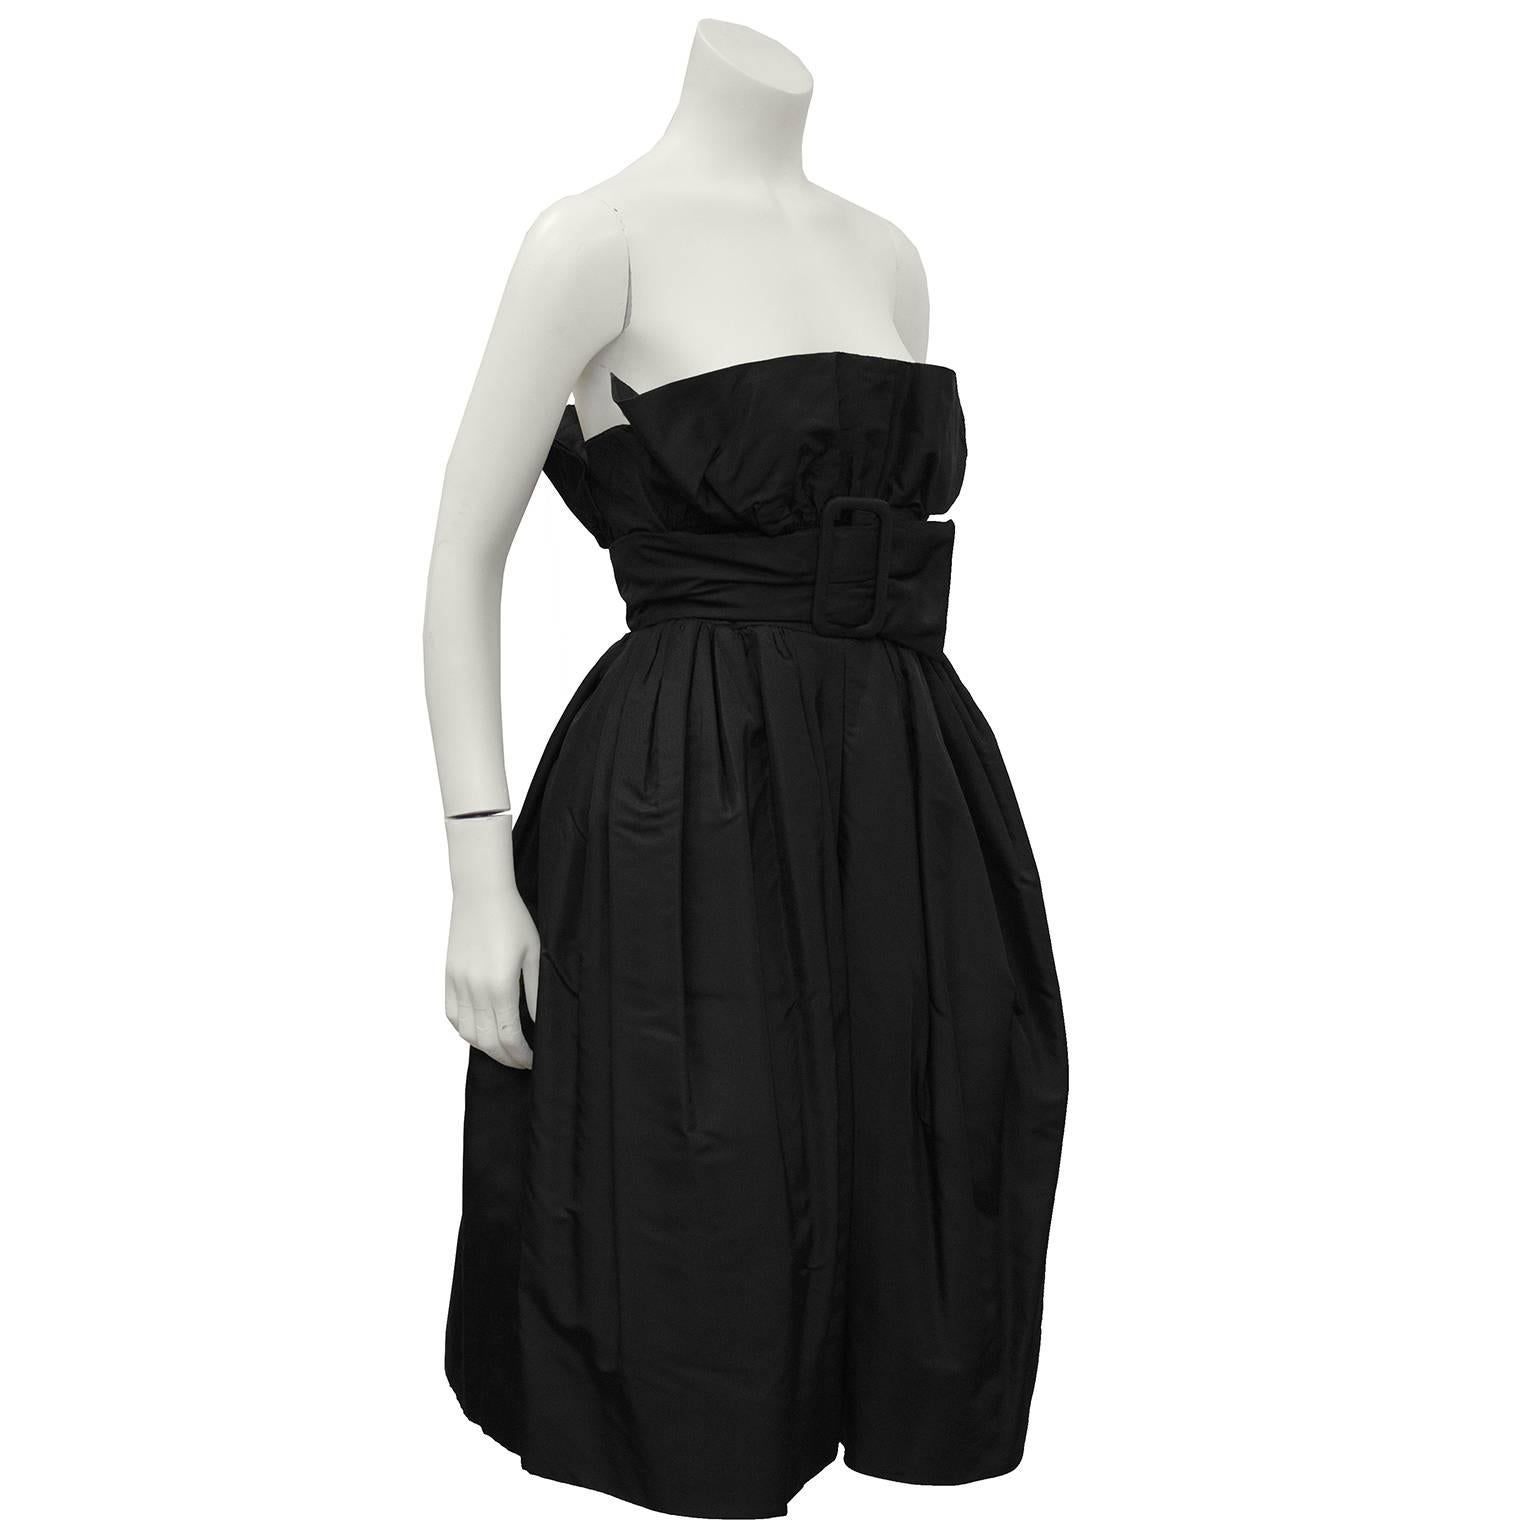 Elegant French couture, anonymous black silk taffeta belted pouf style cocktail dress from the 1960's. The dress has a 'crumb catcher' strapless neckline that is accentuated with an attached matching silk taffeta belt that fastens under the bust